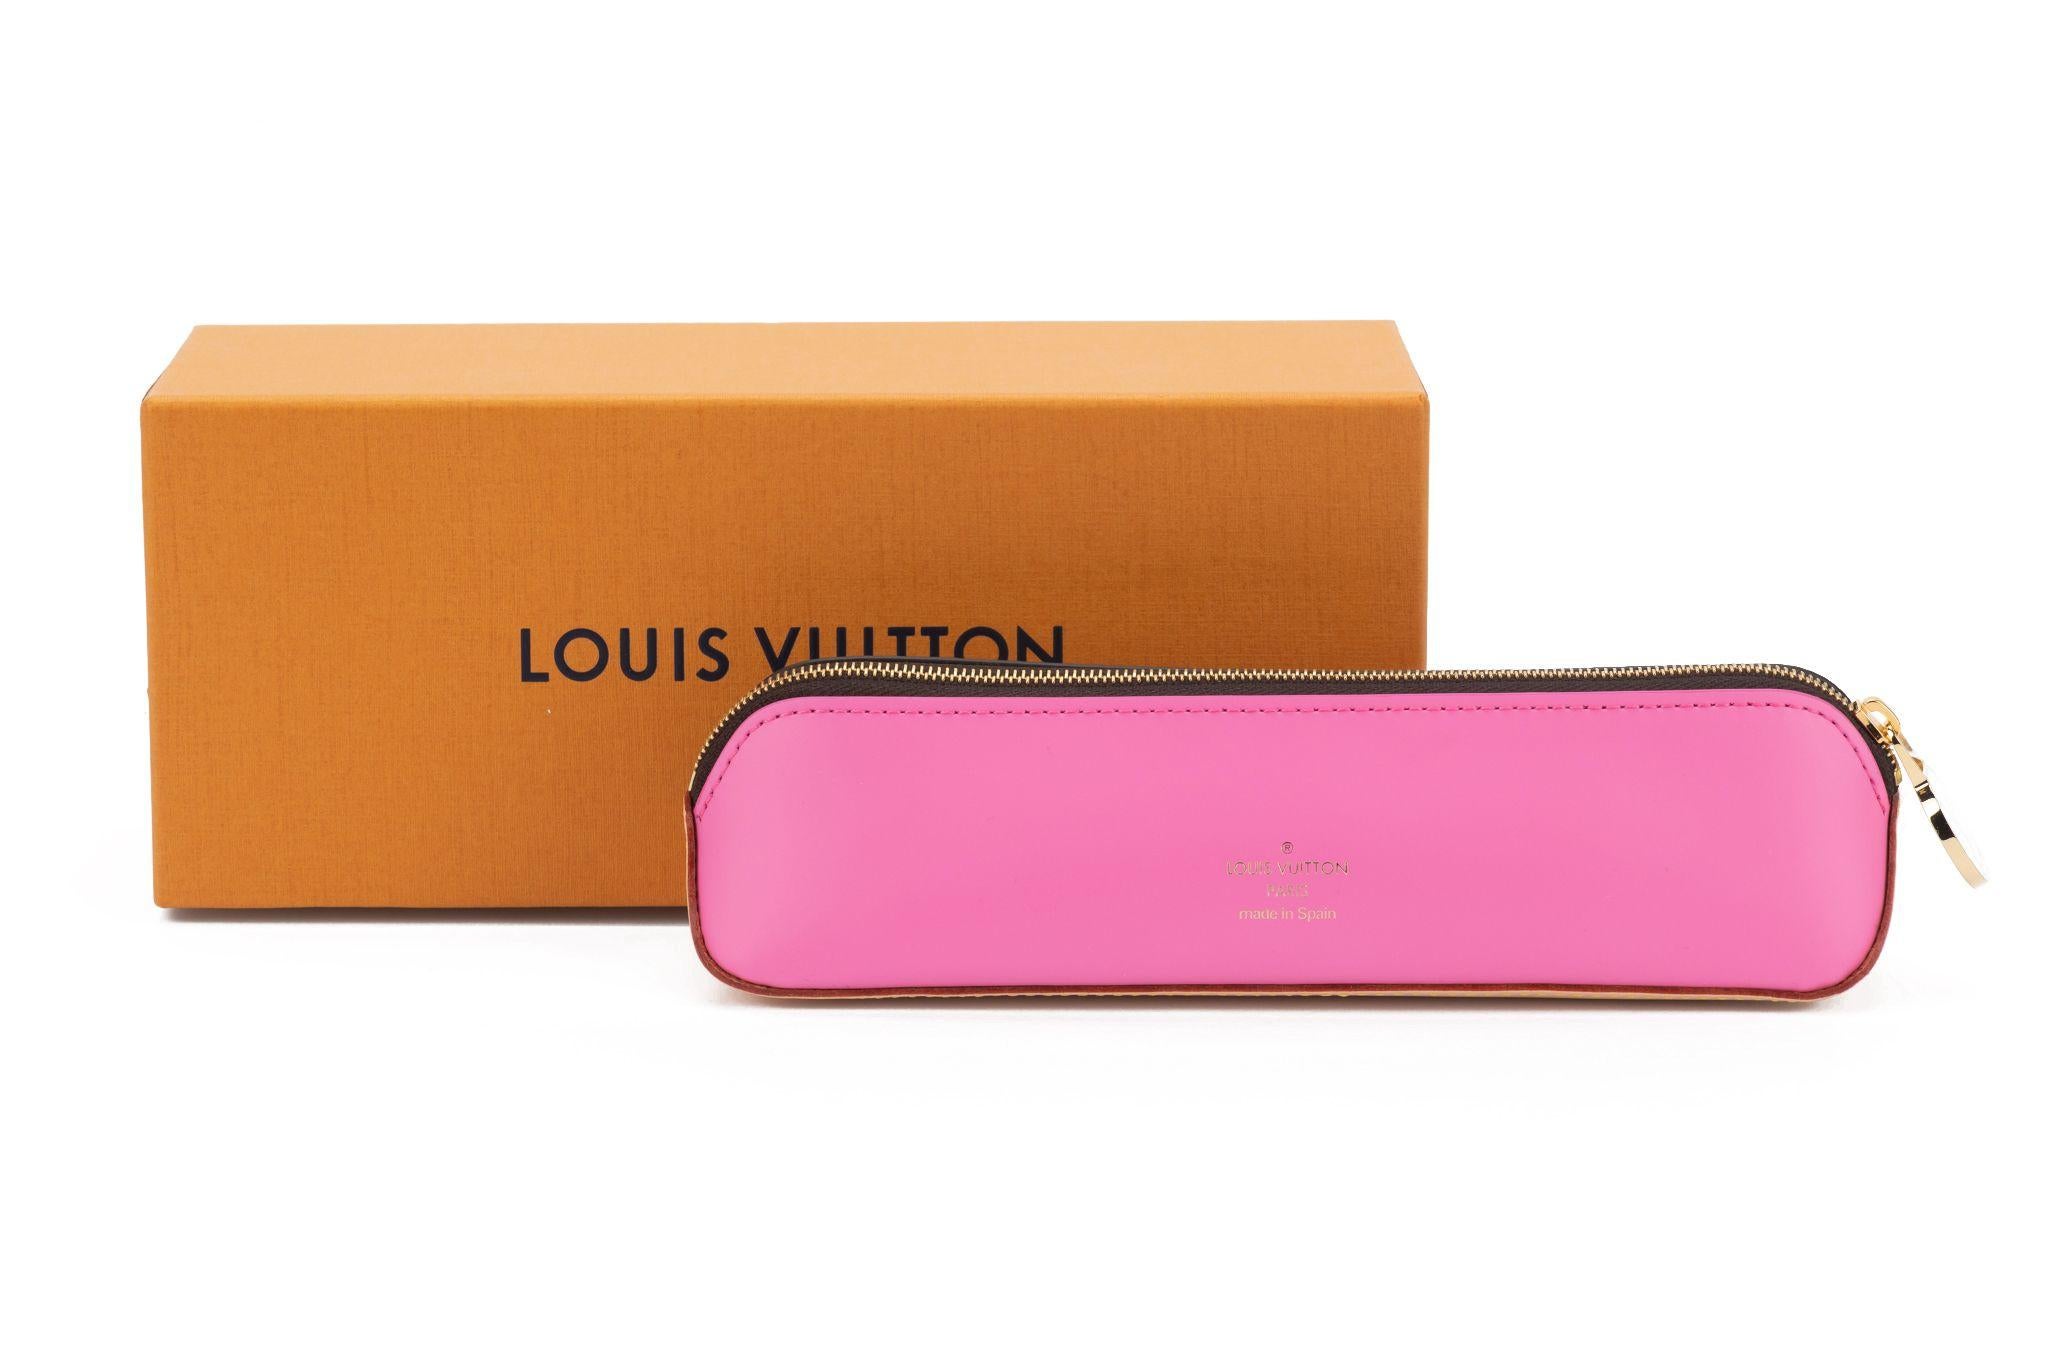 Louis Vuitton Pencil map in pink belongs to the Vivienne Holidays 2022 collection. Very collectible. It's brand new and comes with the original dustcover and box.